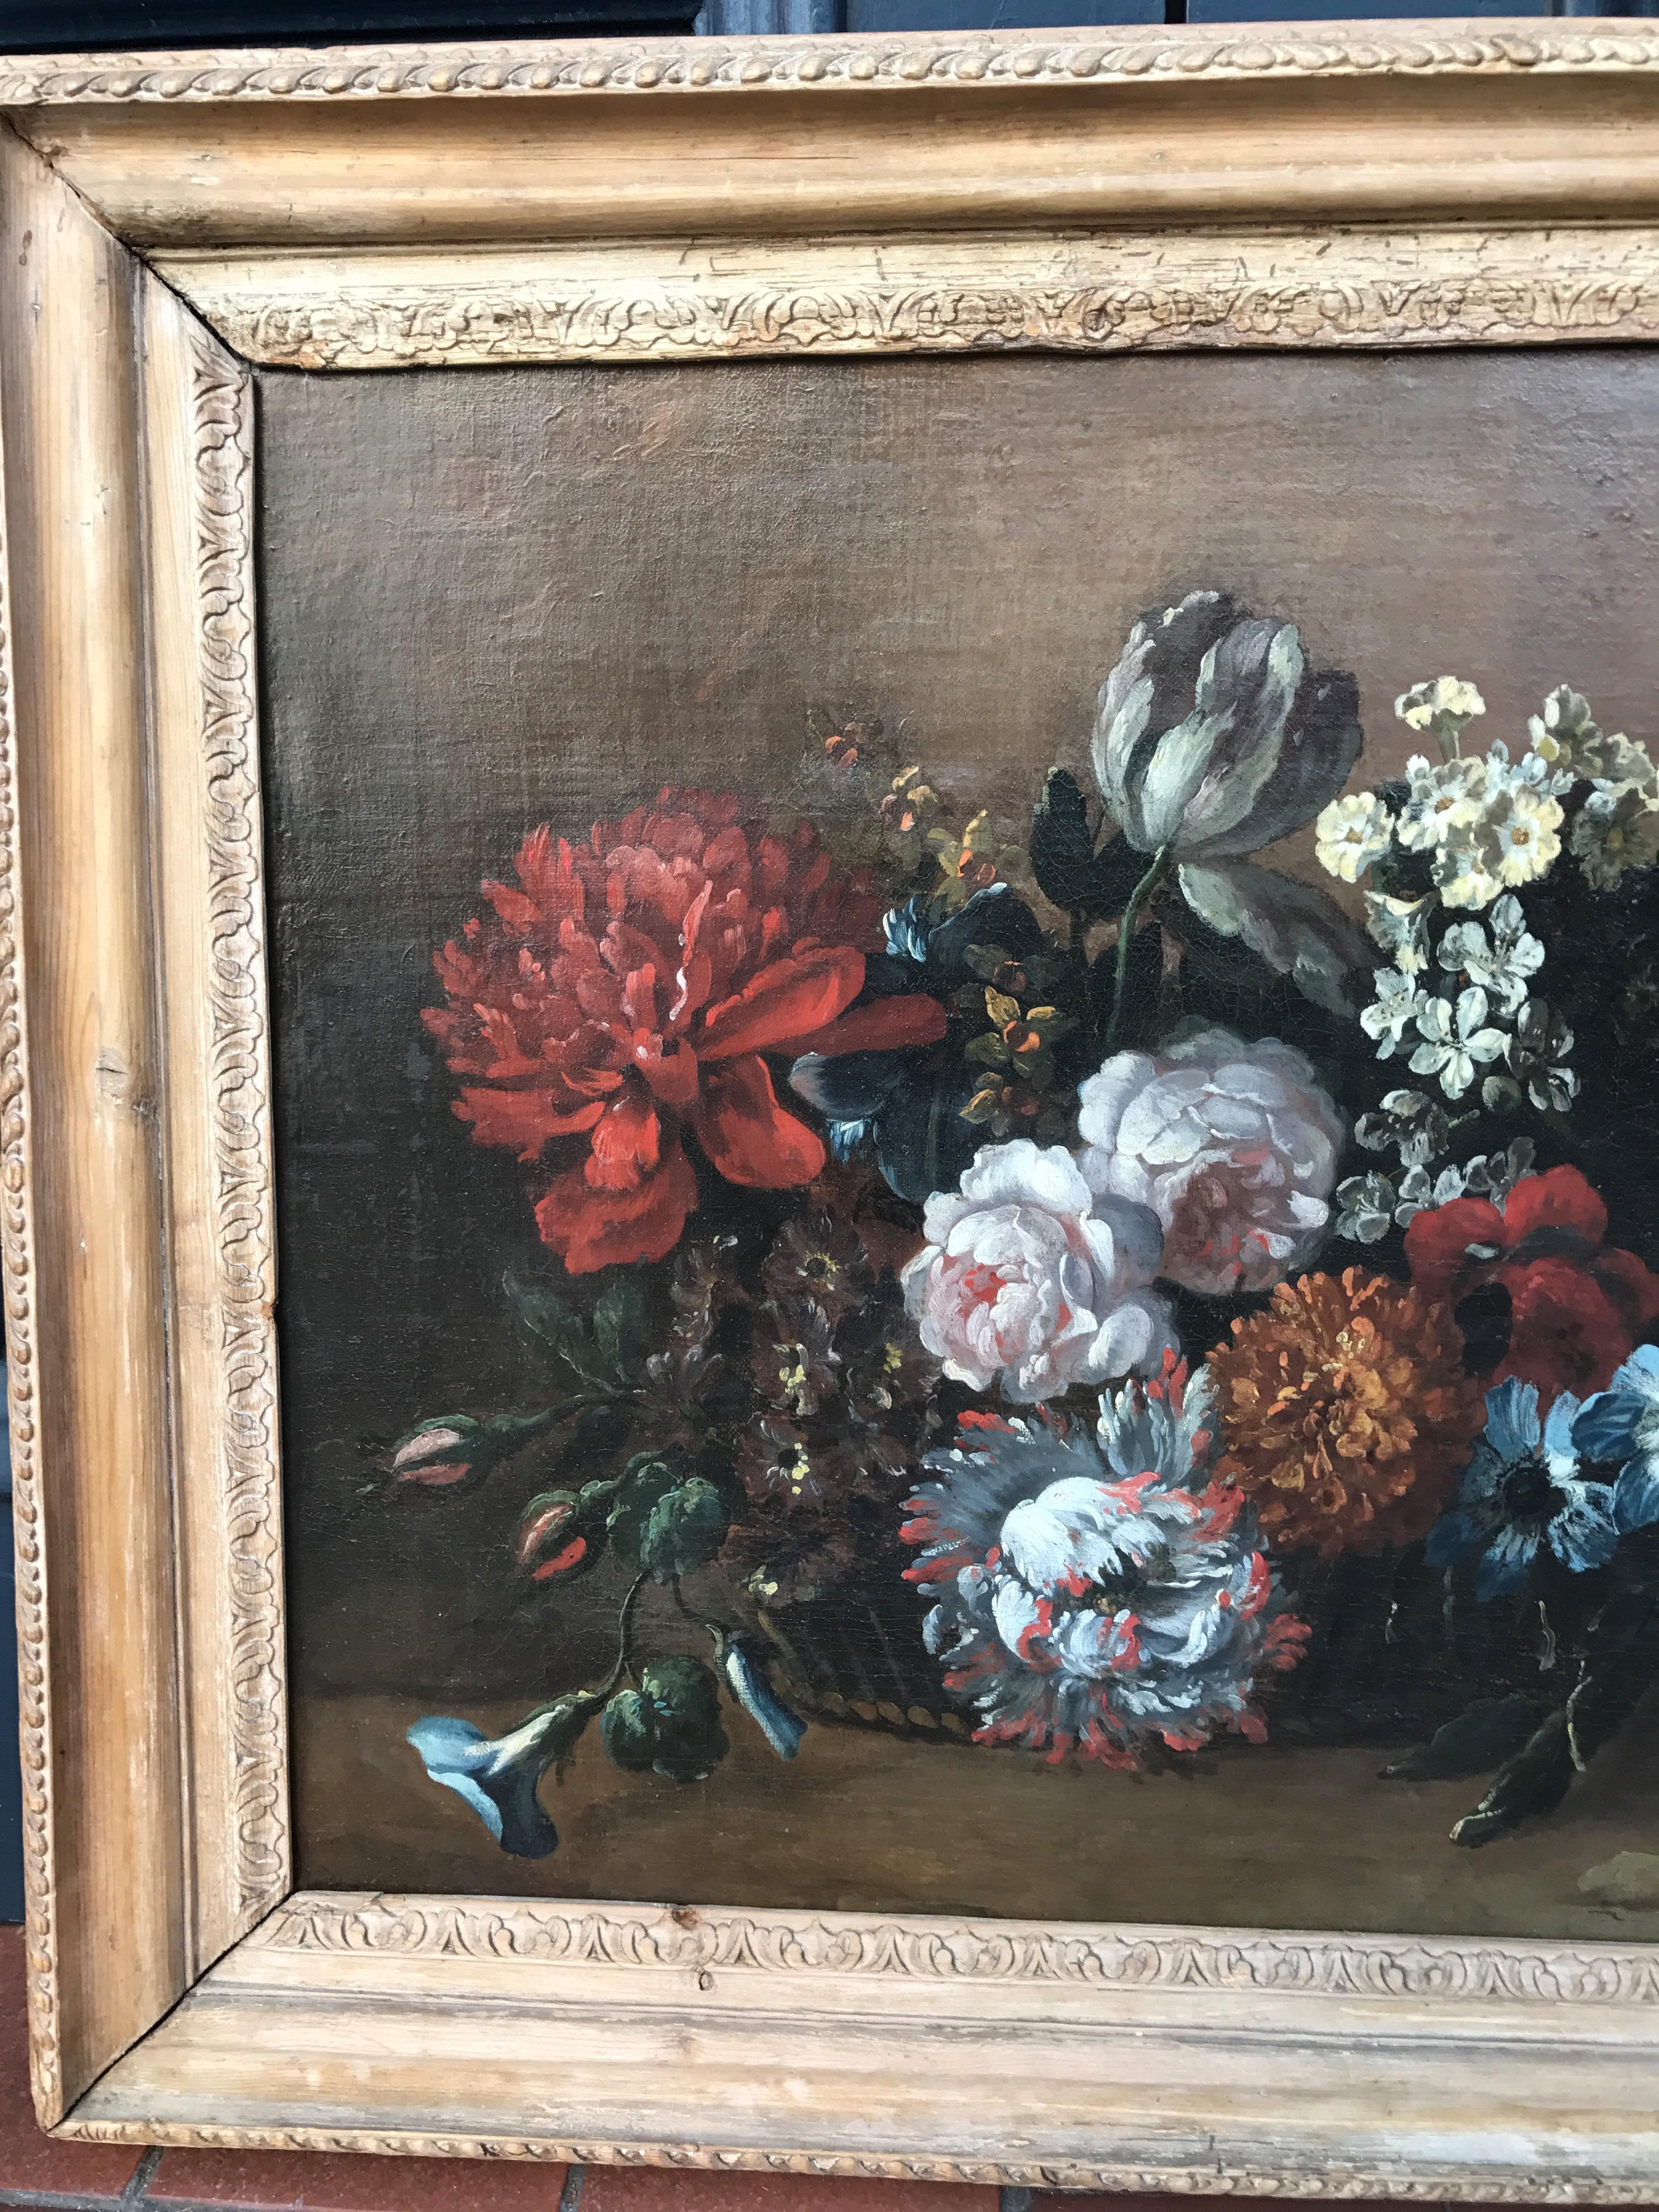 
Attributed to Jacob BOGDANI (1658-1724, Hungarian & British)
Still Life with Parrot Tulip, Roses, Poppies and other flowers
Oil on Canvas
c. 1720
Framed 28 x 32 inches

Bogdani was born into a protestant gentry family in the city of Eperjes in the